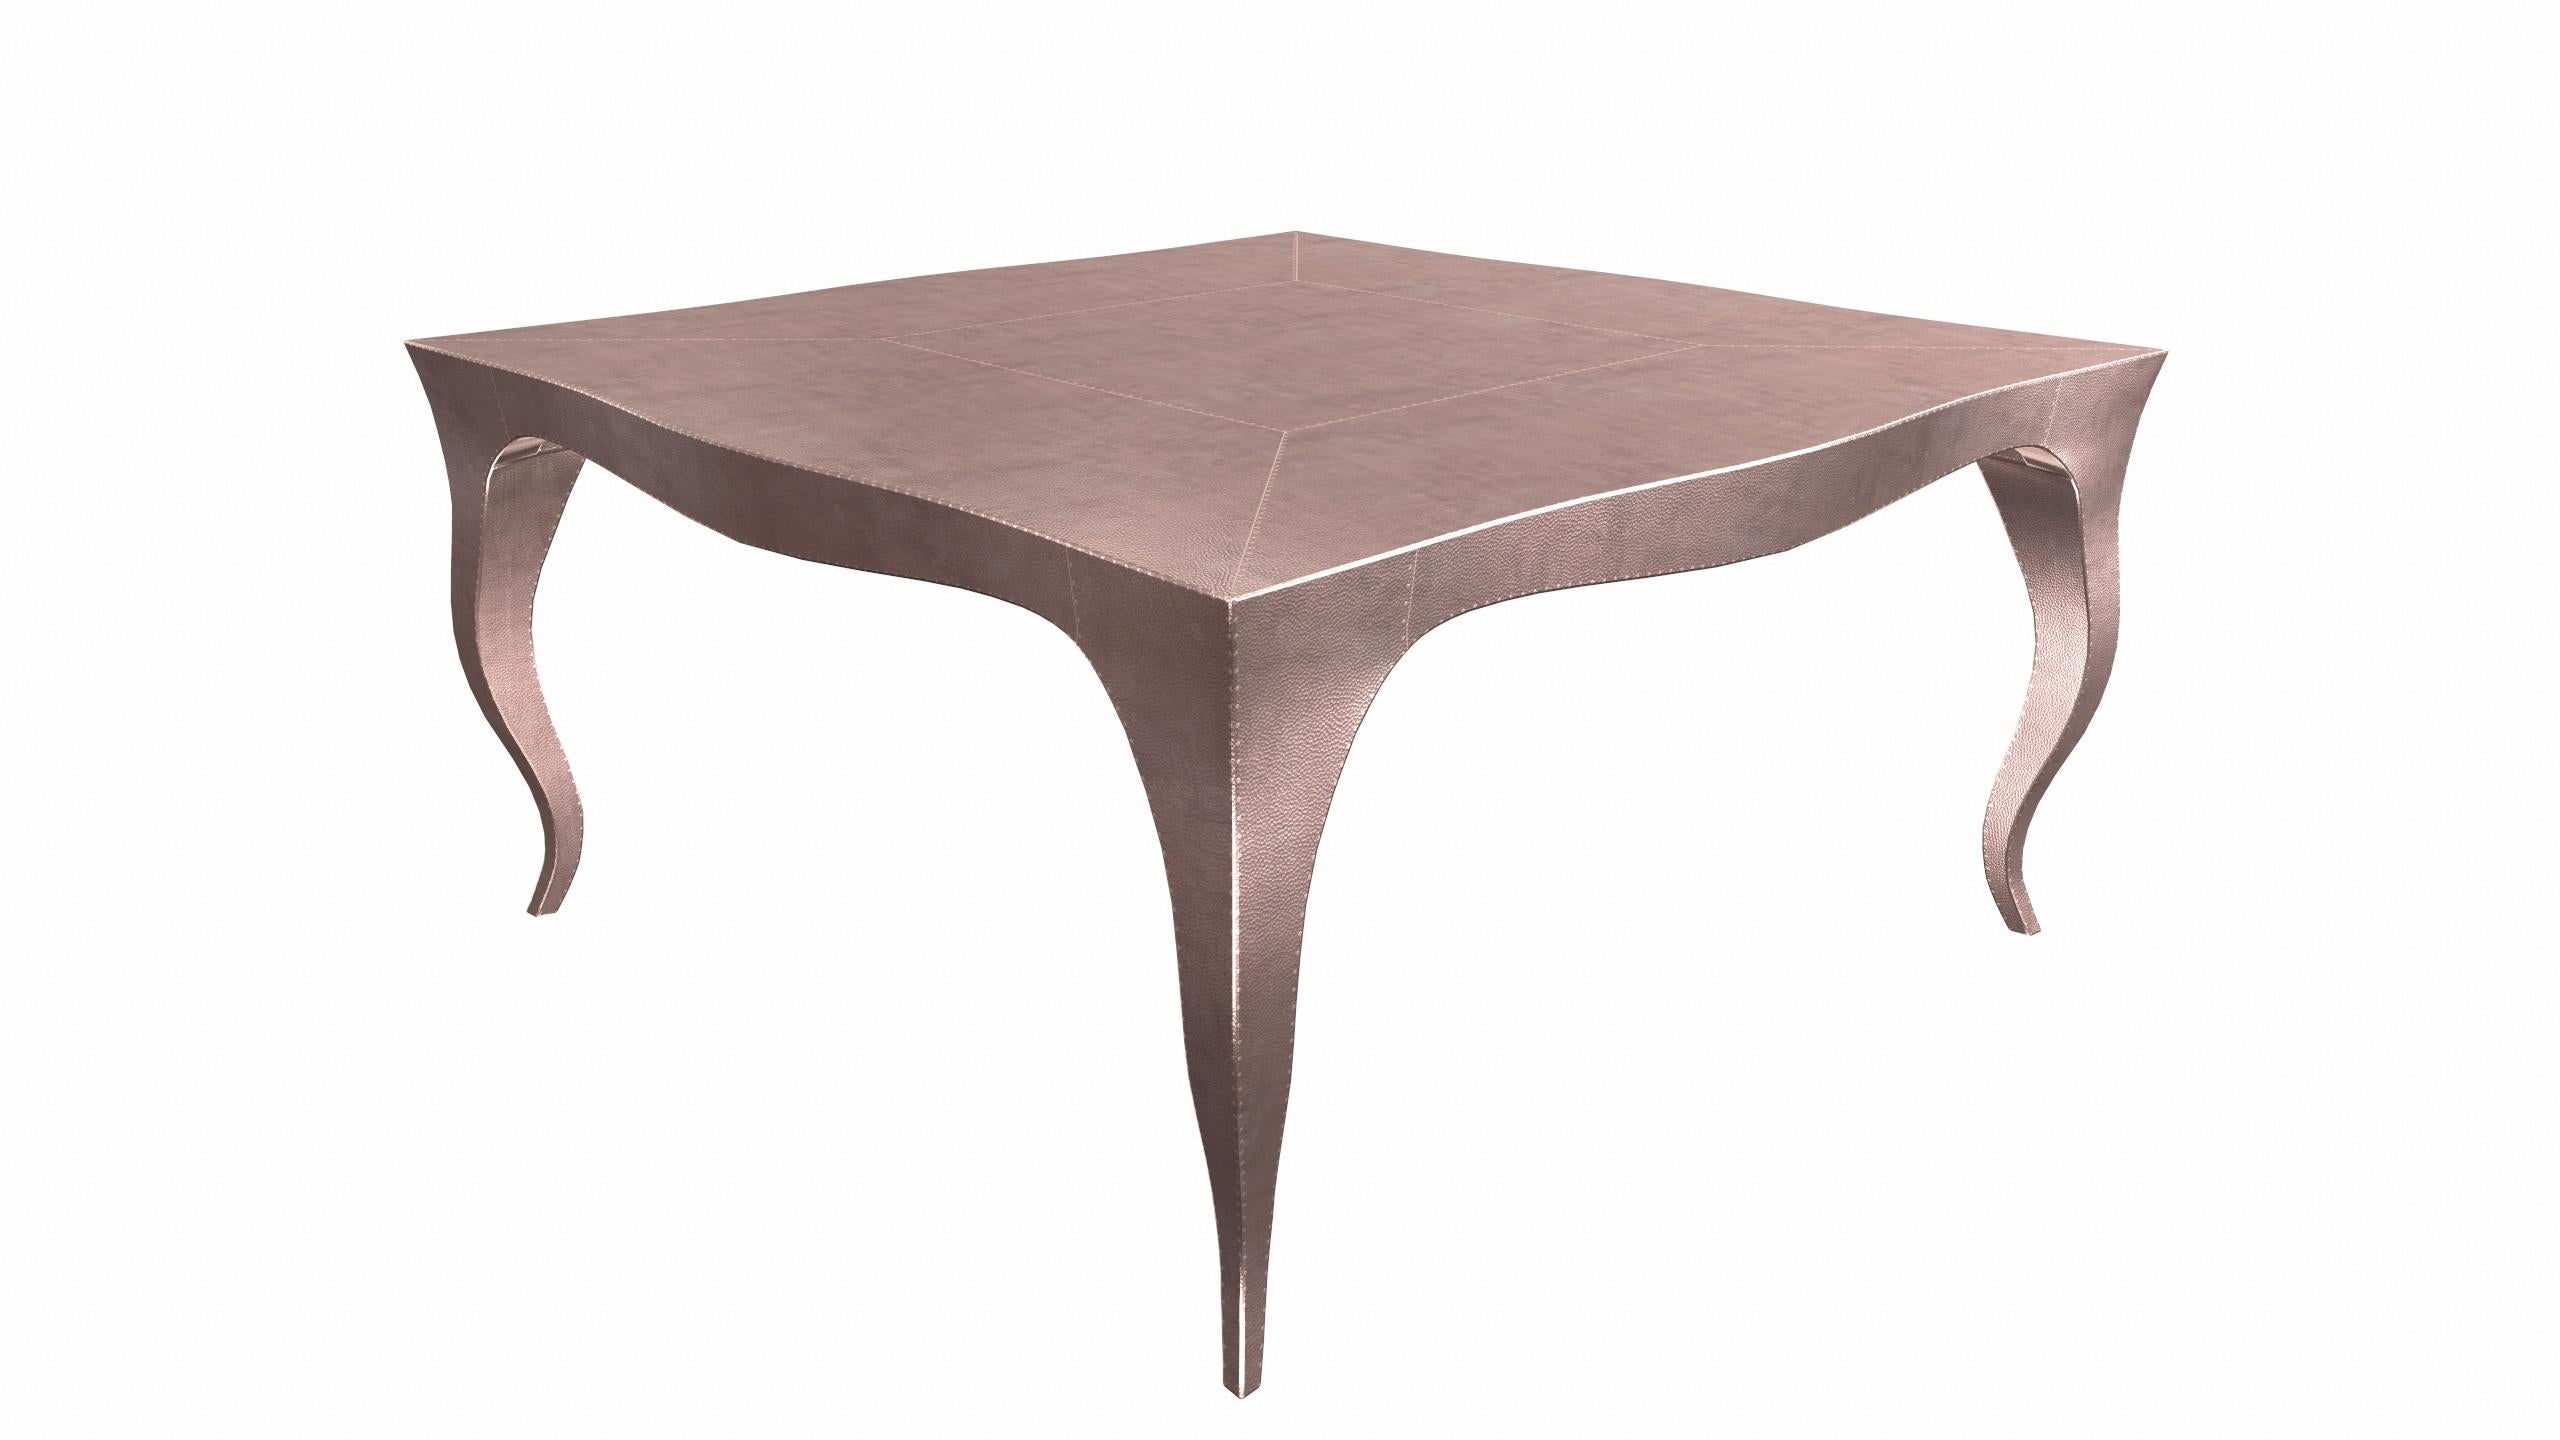 Other Louise Art Deco Industrial and Work Tables Mid. Hammered Copper by Paul Mathieu For Sale